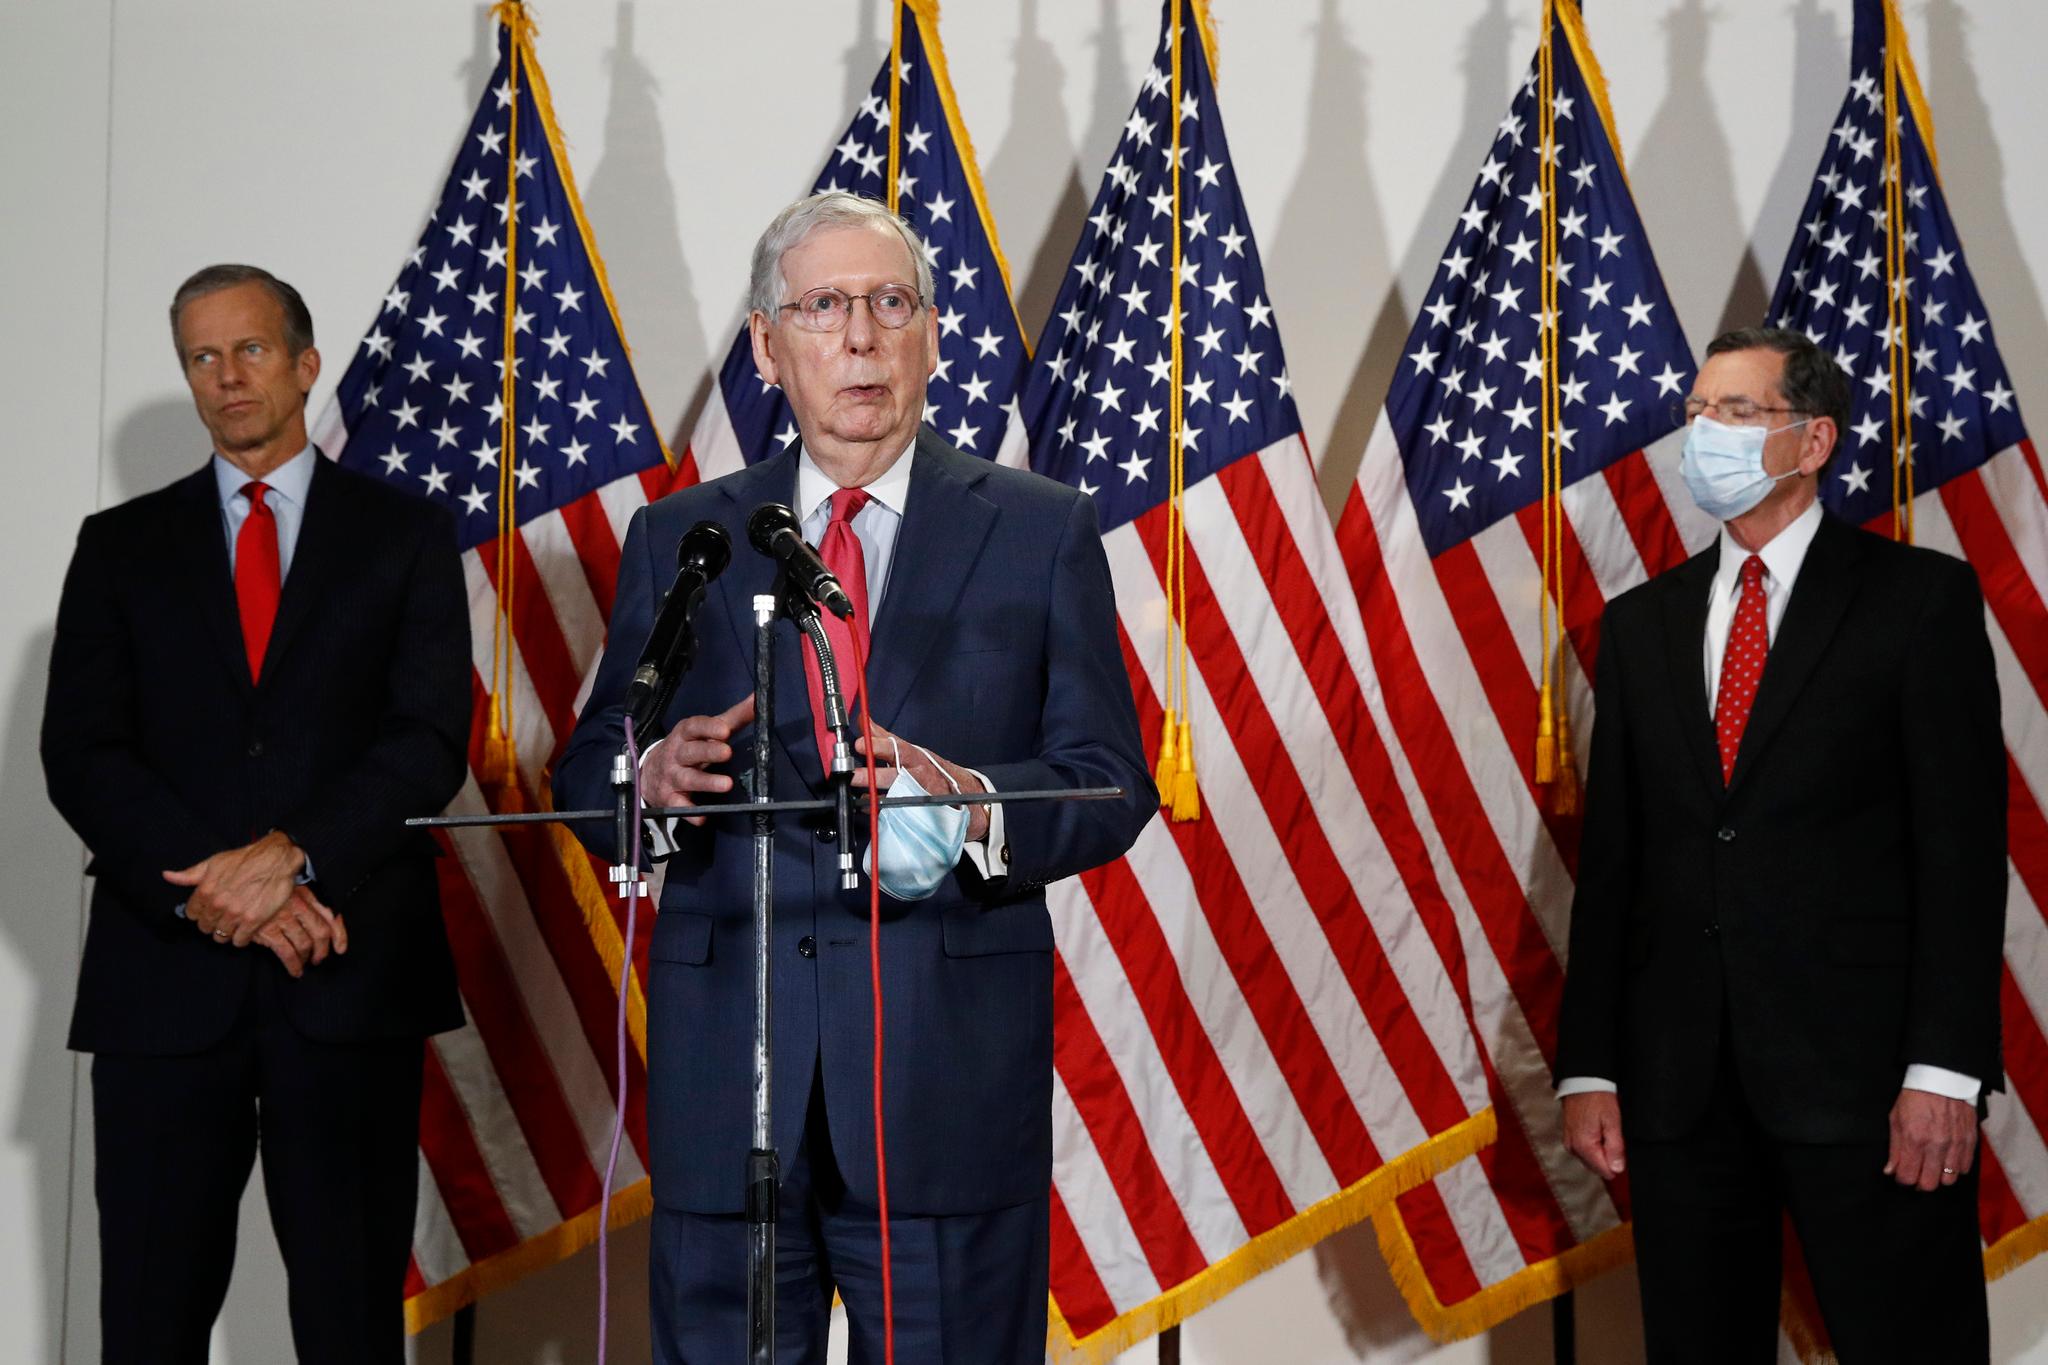 Senate Majority Leader Mitch McConnell speaks with reporters after meeting with Senate Republicans at weekly luncheon on Capitol Hill